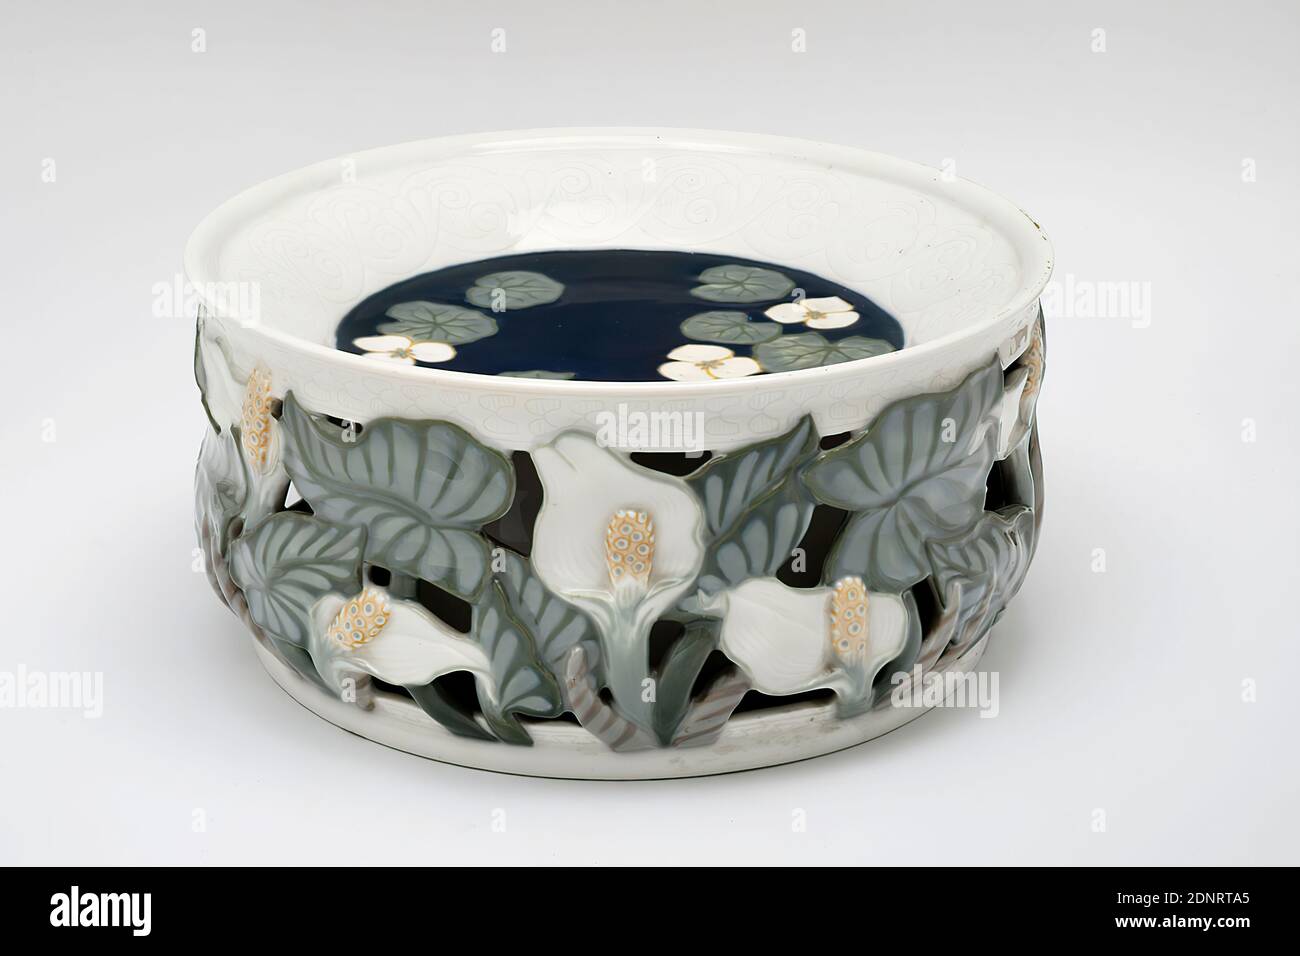 Fanny Garde, Bing & Grøndahl, Large, double-walled ornamental bowl, Acquired by Bing & Grøndahl at the 1900 World Fair in Paris, porcelain, painted, glazed, underglazed decoration, Total: Height: 14.3 cm; Diameter: 30 cm, signed and inscribed: inside the wall: in underglazed blue: B & G, 612, F. Guard, Stamp: Manufacture stamp in green: Coat of arms of Copenhagen, B&G, Kobenhavn, Danish China Works, dinner and serving dishes, plants, vegetation, art nouveau Stock Photo